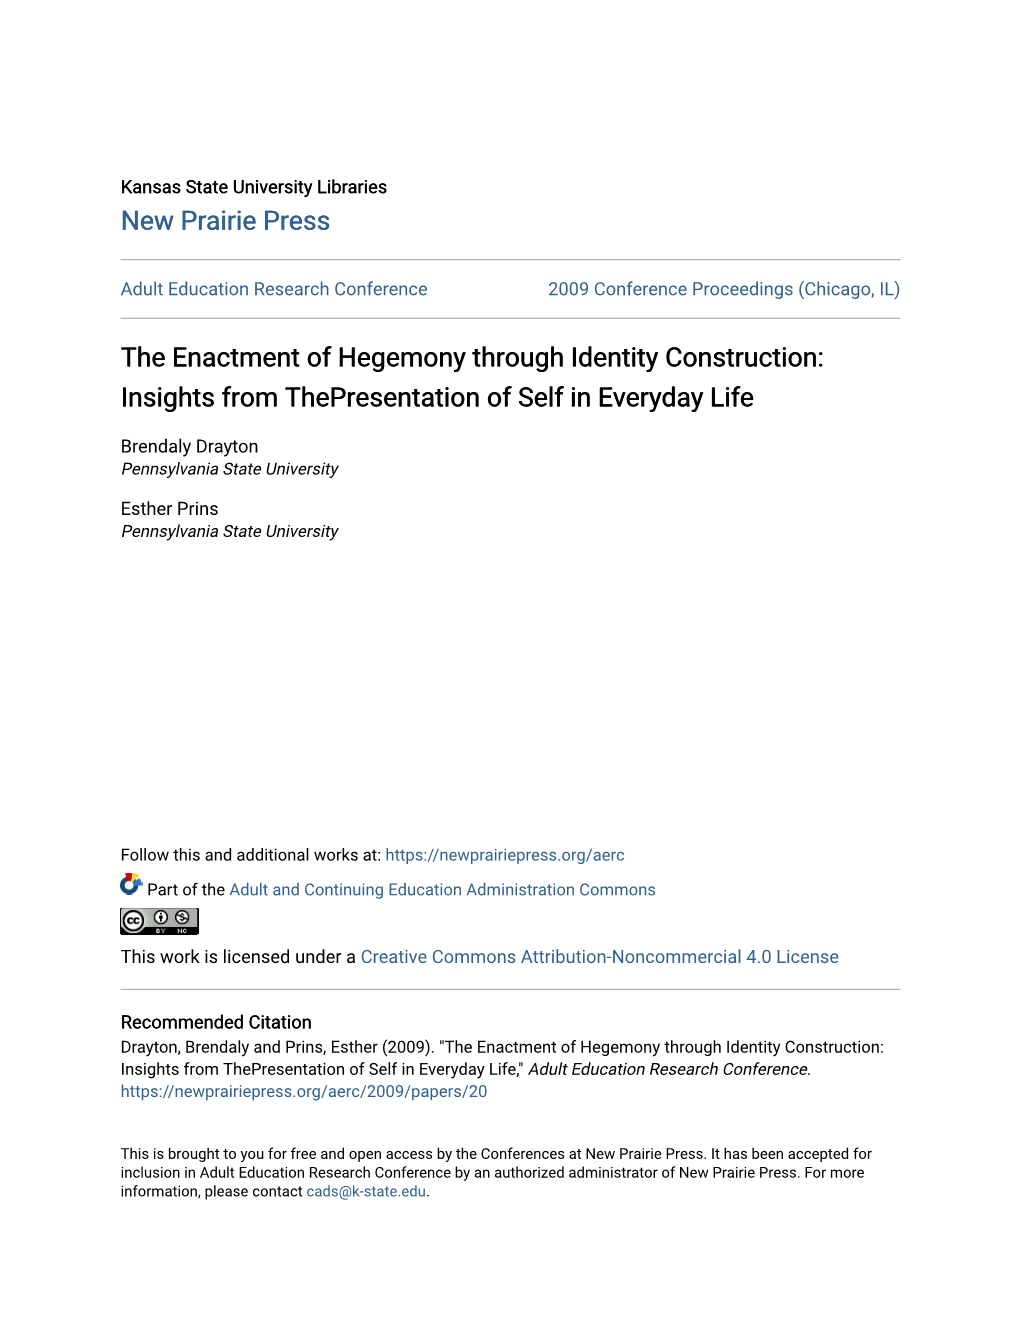 The Enactment of Hegemony Through Identity Construction: Insights from Thepresentation of Self in Everyday Life